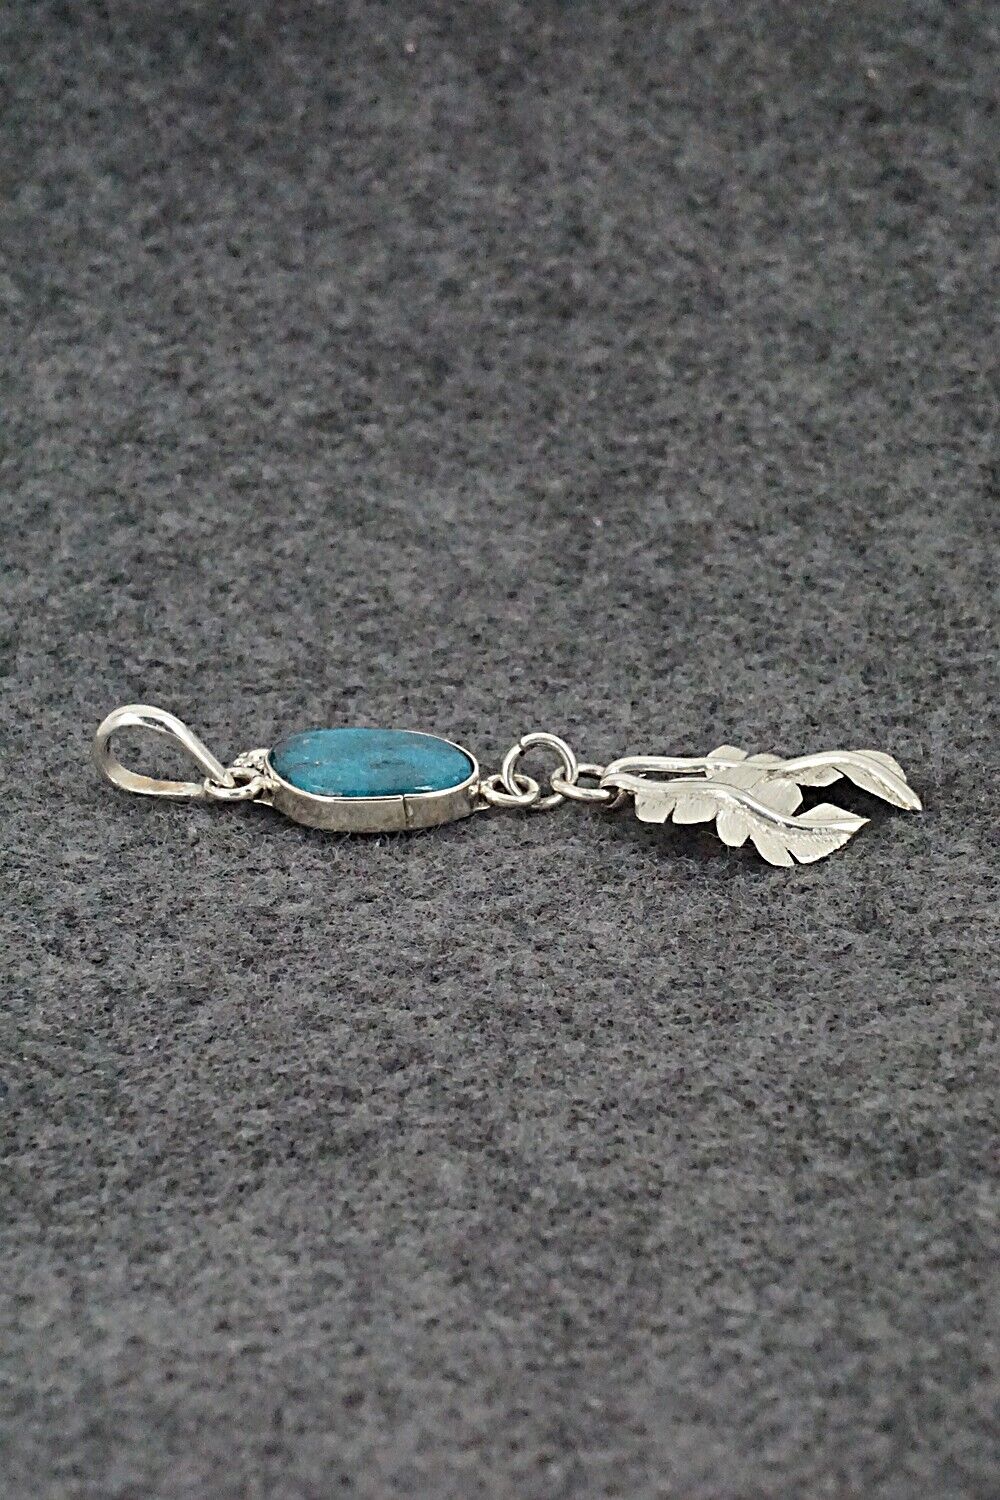 Turquoise & Sterling Silver Pendant - Tammy Deysee